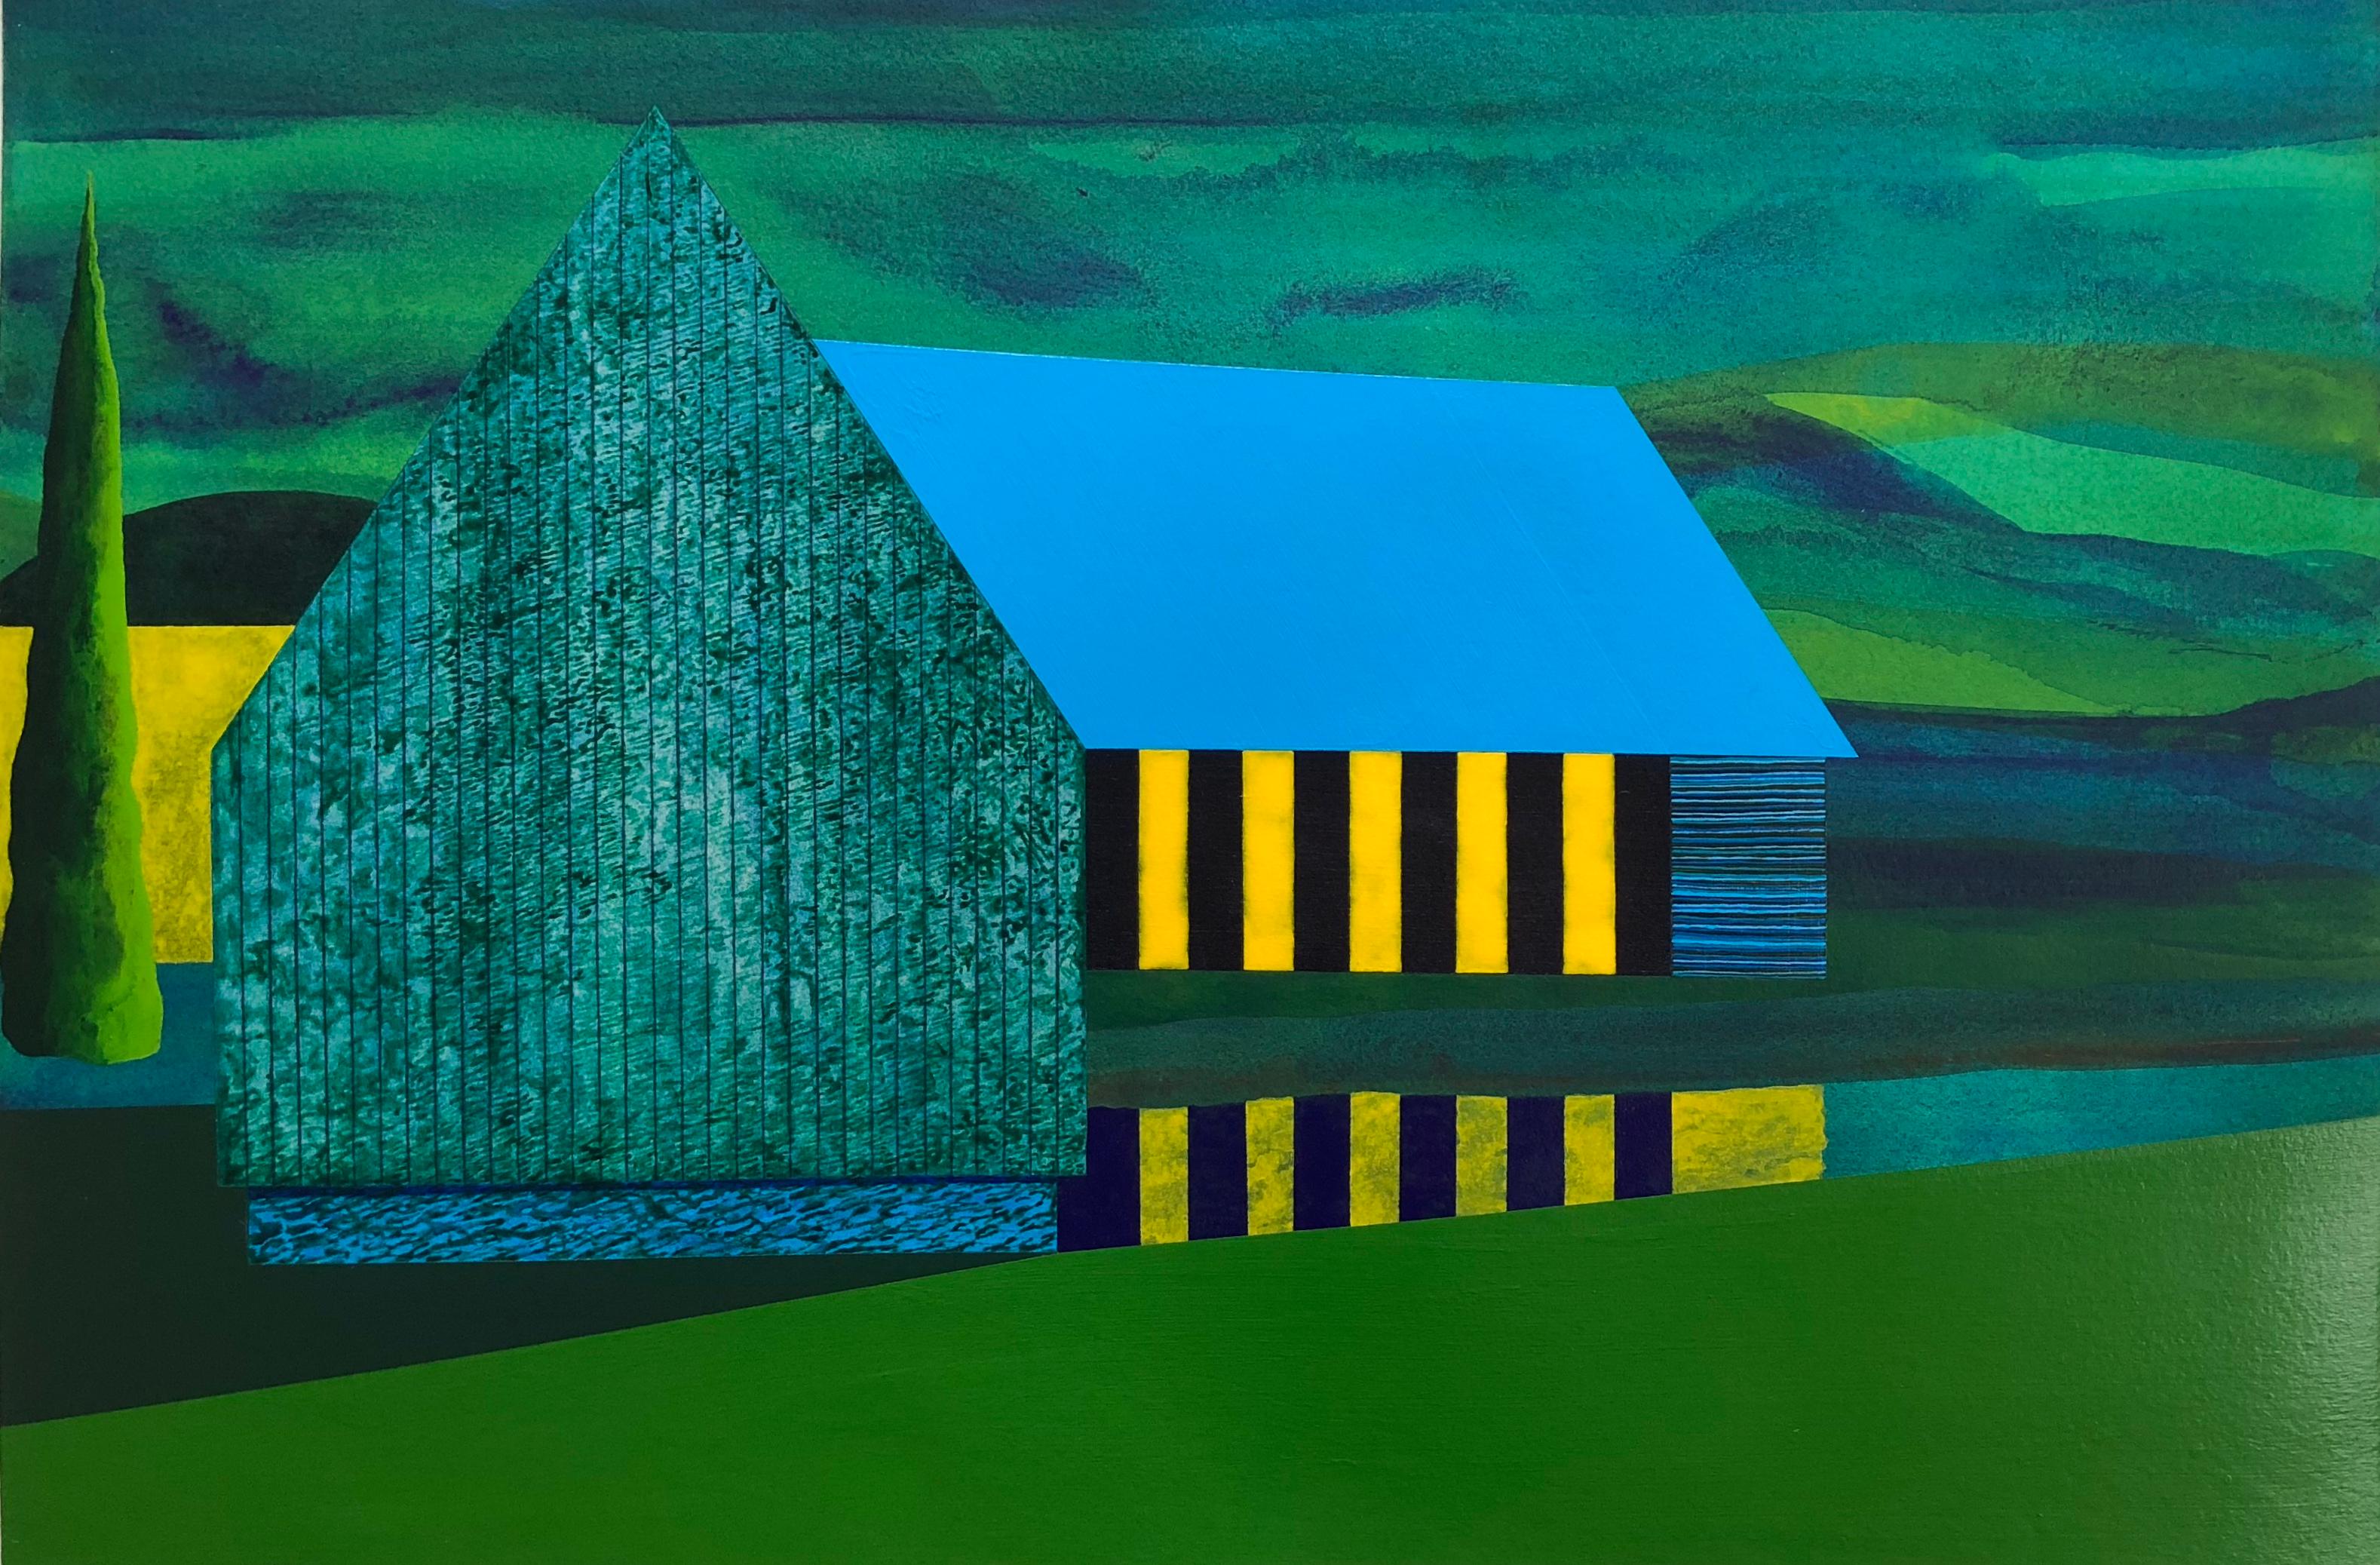 James Isherwood Figurative Painting - Blind Coast, blue and green architecture against sky, landscape painting